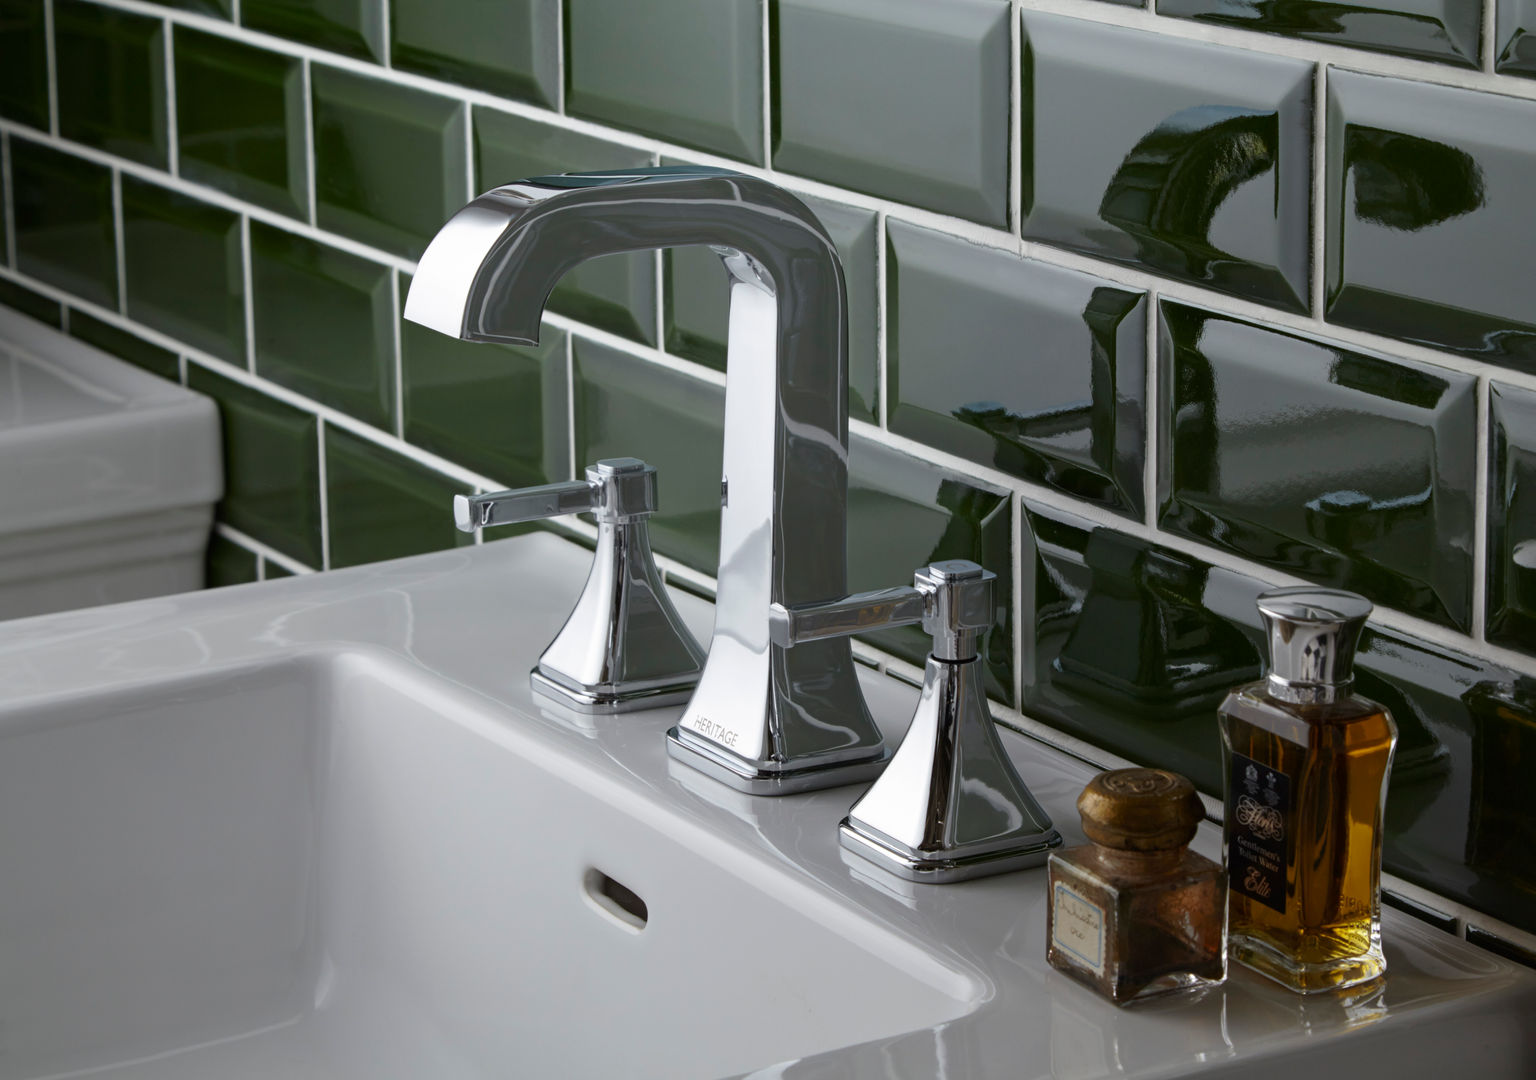 Somersby 3 hole basin tap Heritage Bathrooms 浴室 Somersby